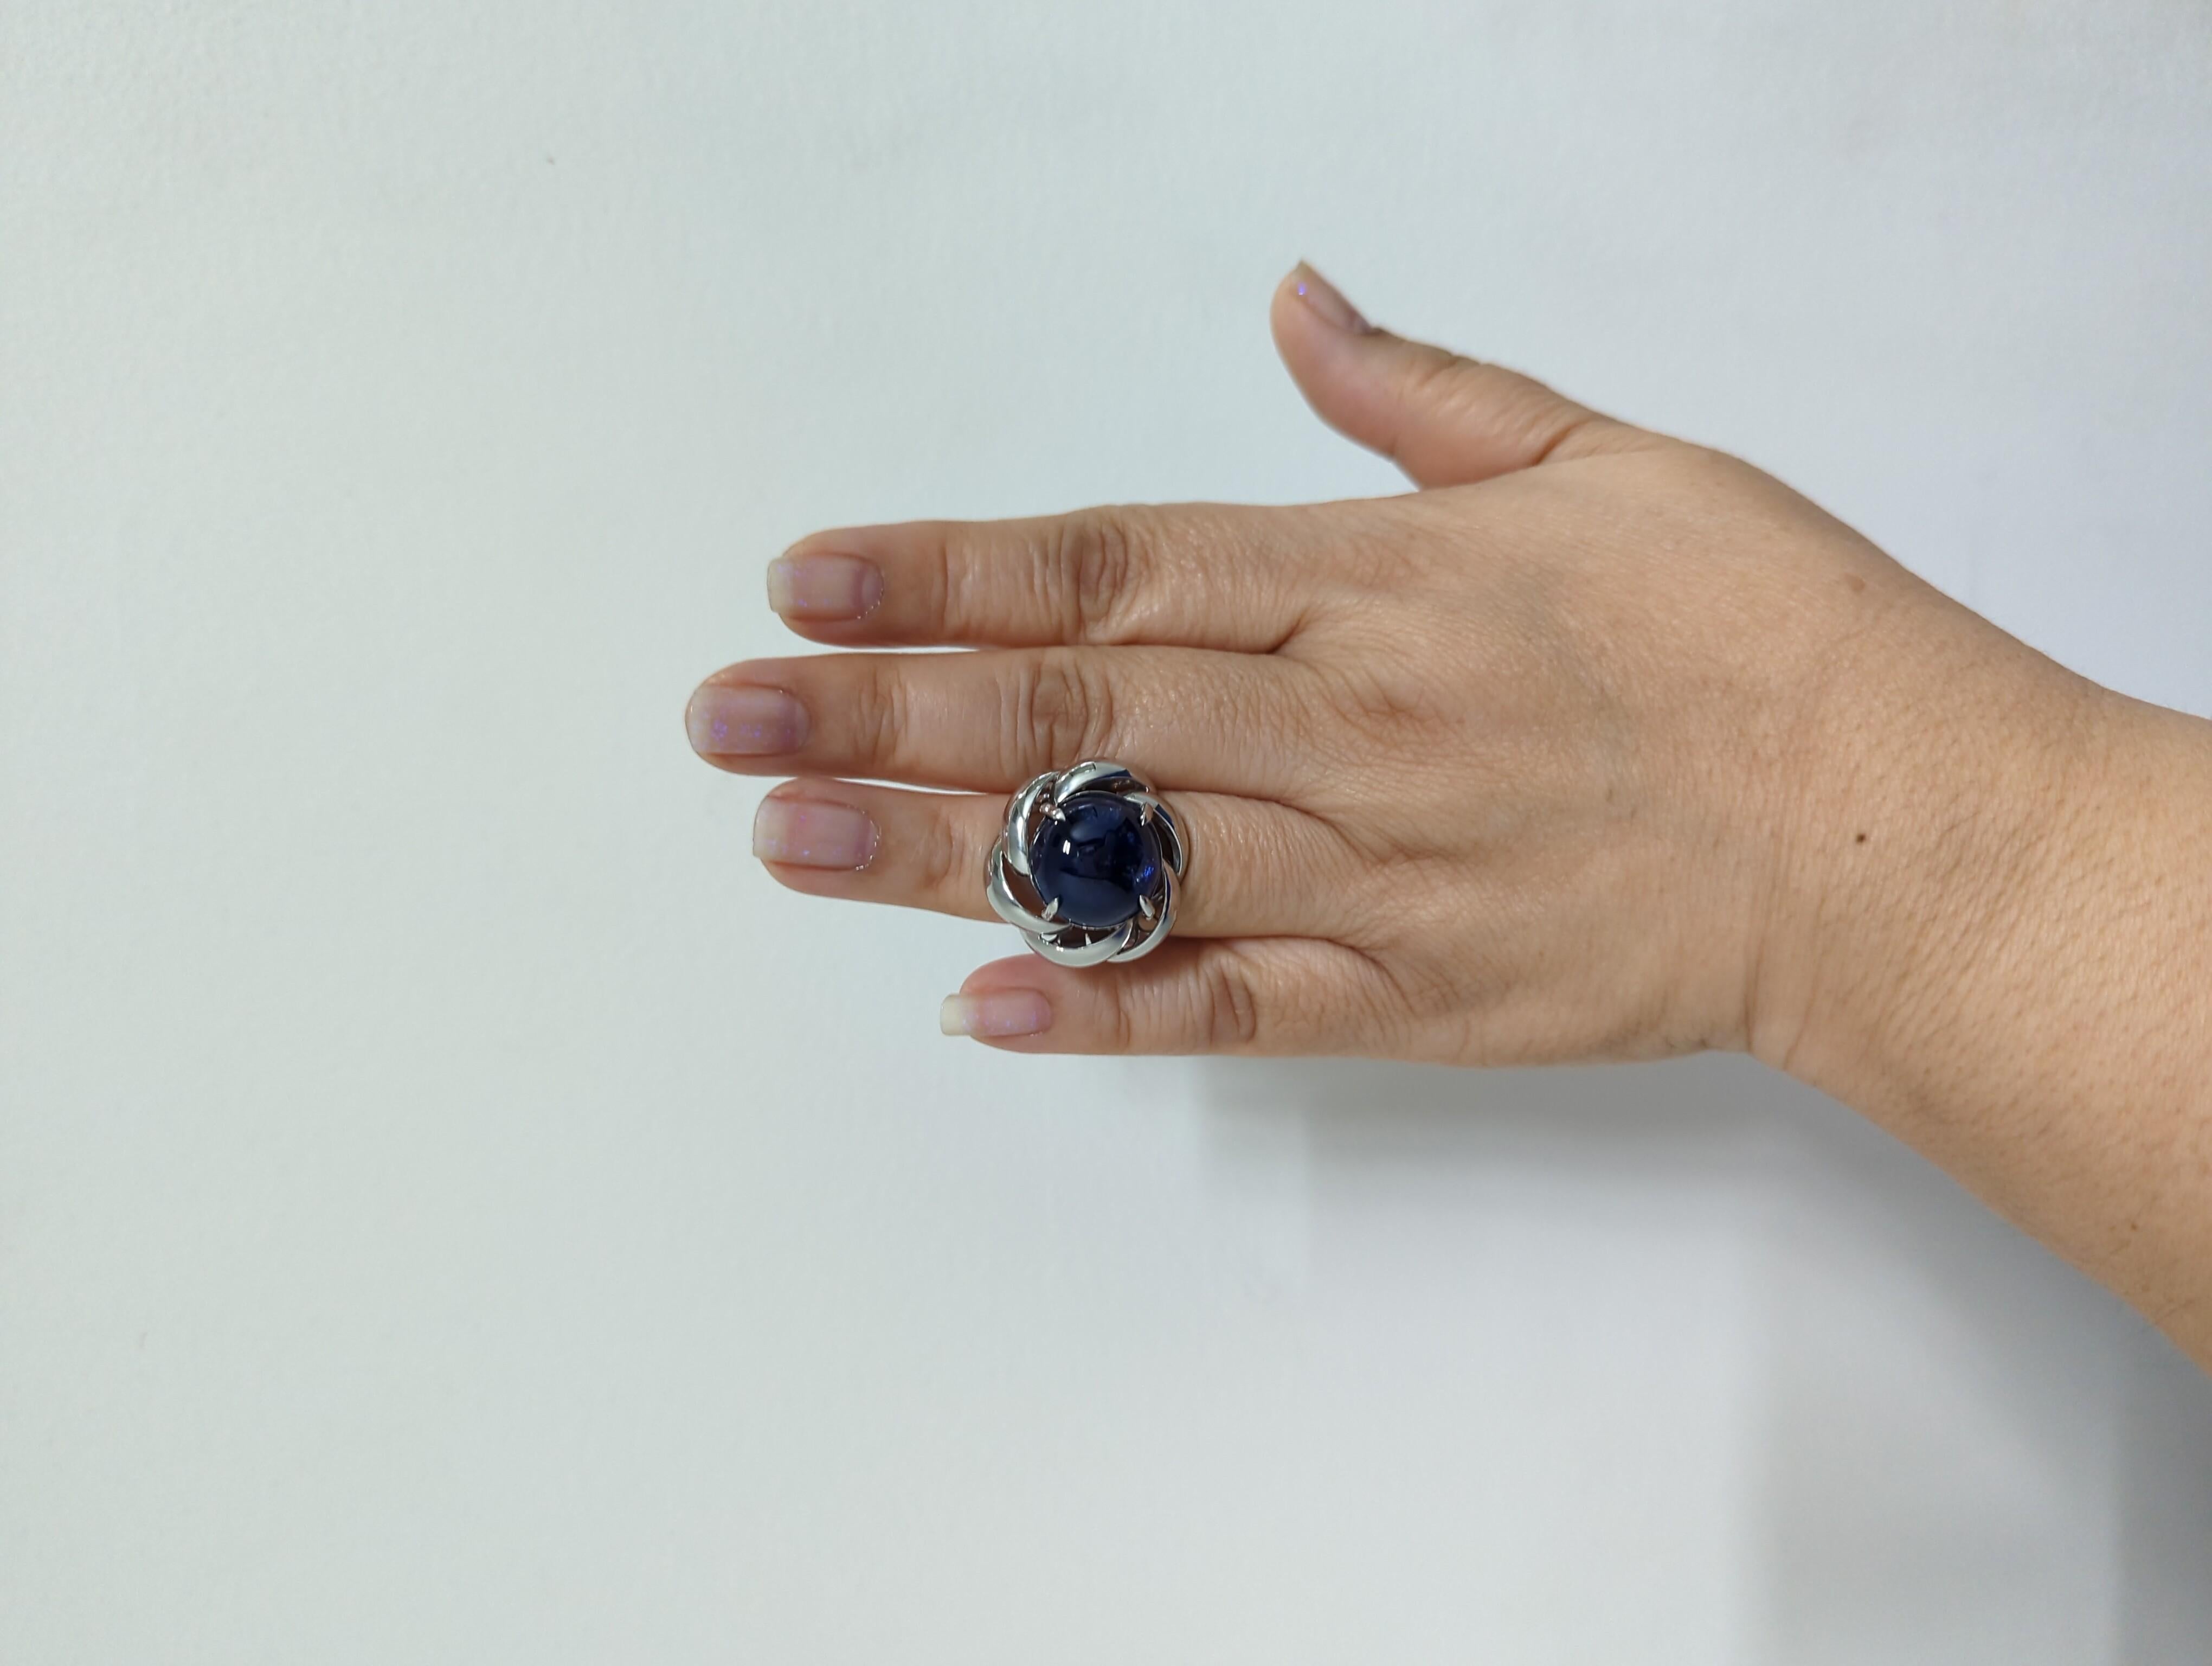 Beautiful 24.42 ct. GIA Sri Lanka blue sapphire cabochon round.  Handmade in platinum.  Ring size 6.75.  Comes with GIA certificate.